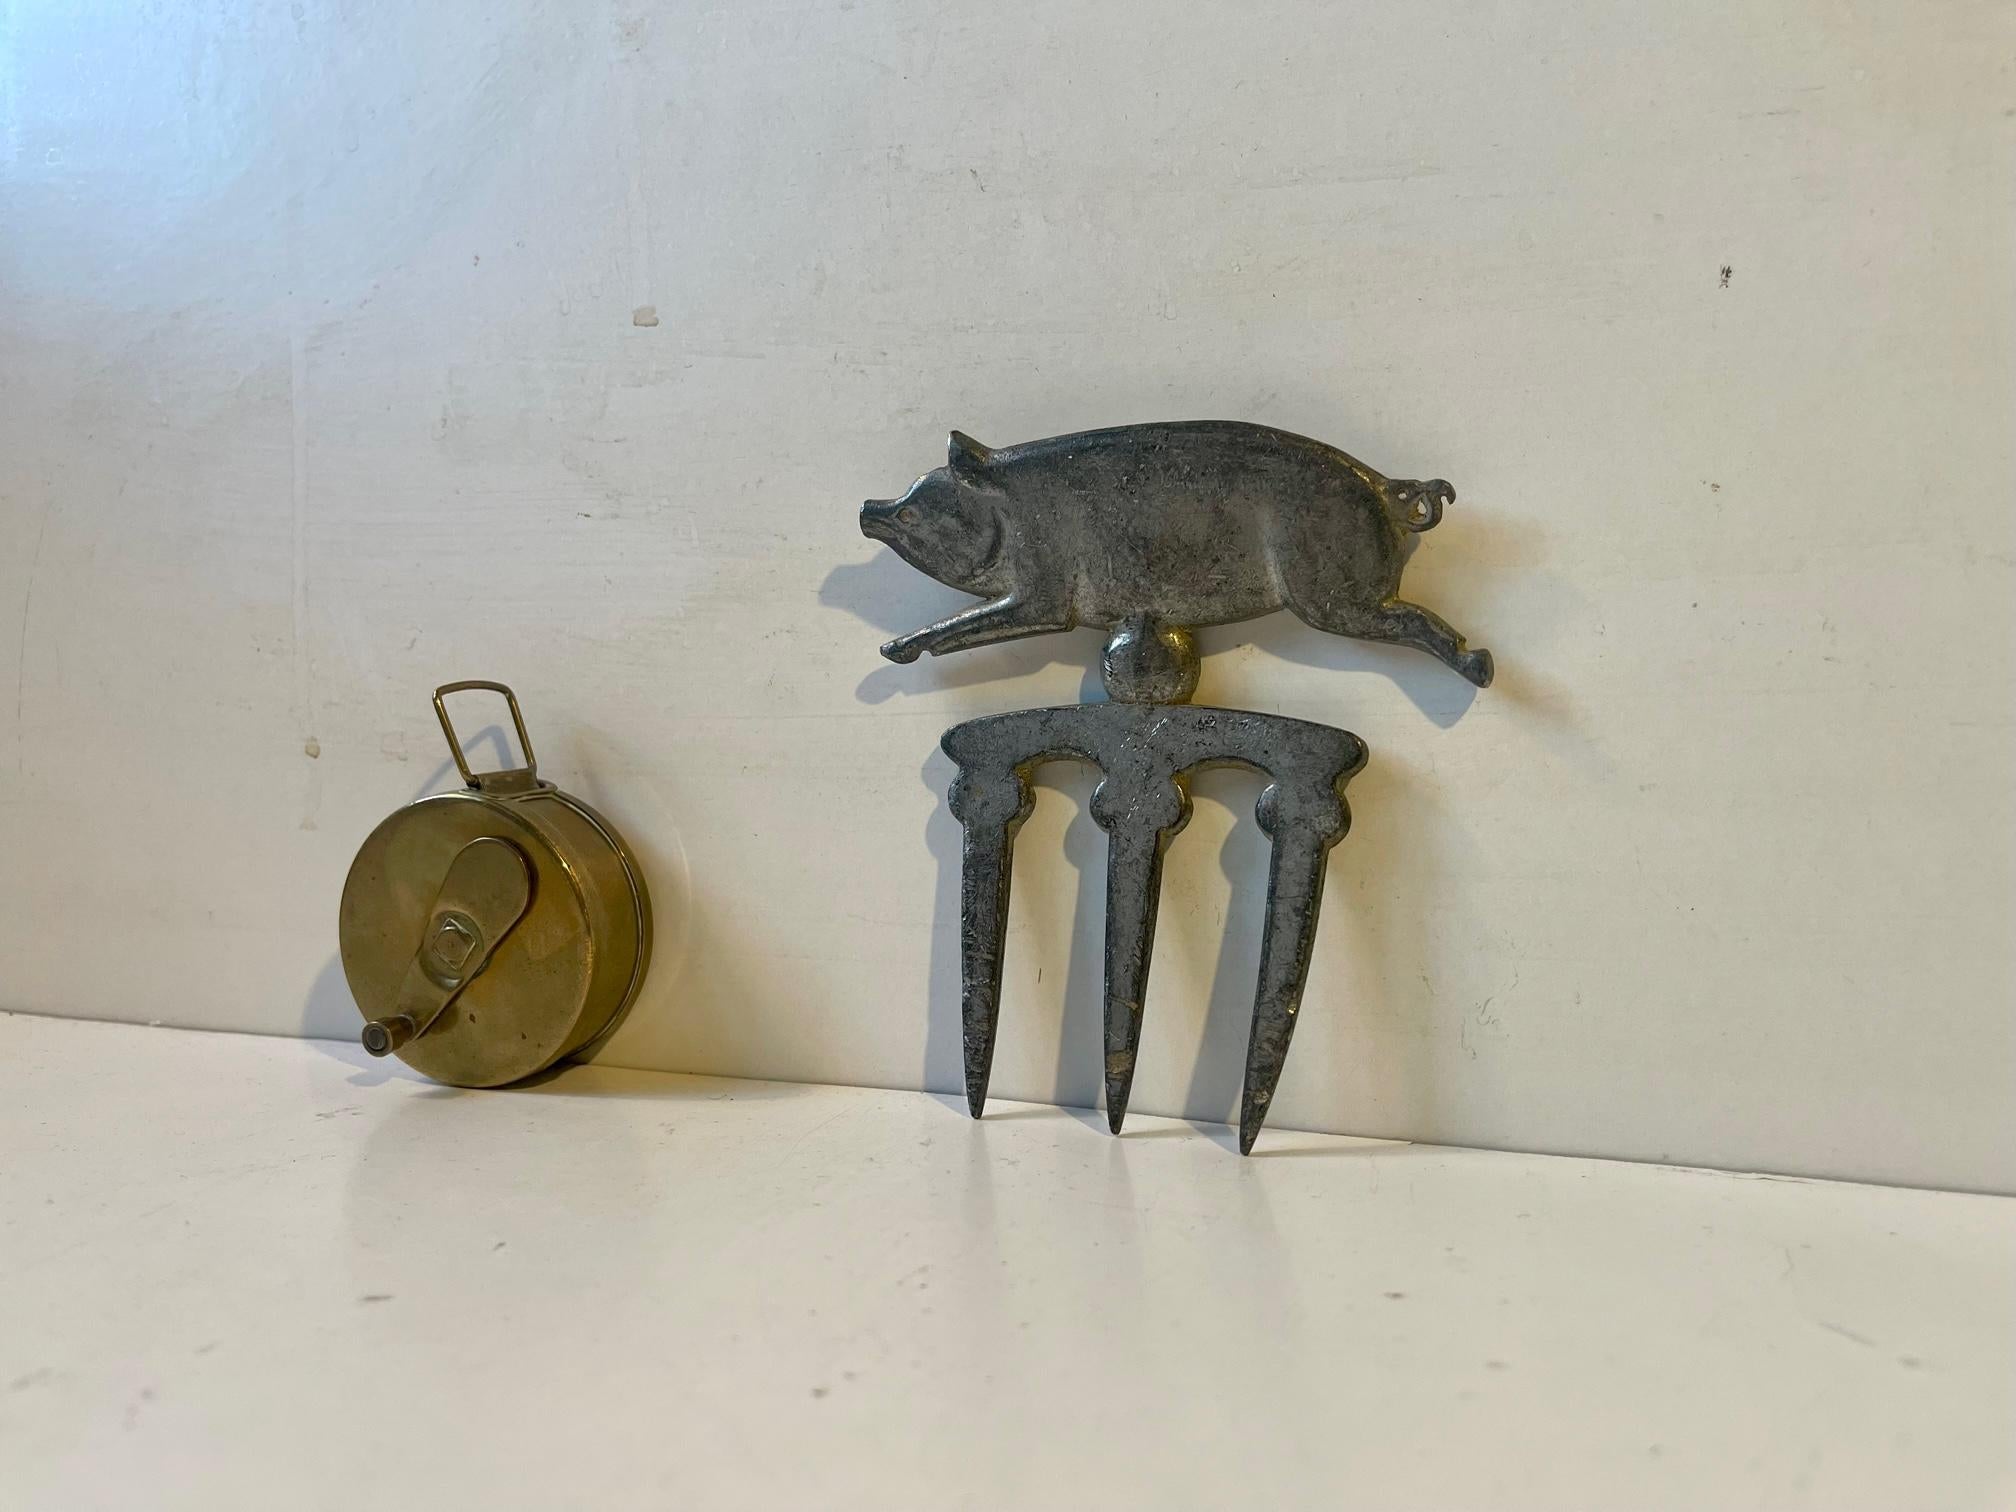 Unusual set of butcher accessories. A solid brass measuring tape dispenser for measuring the chest/feed level (text in Danish) of livestock both pigs and cows and a 1930s pork meat display stick-in sign in zink or pewter. Measurements: dispenser: 5